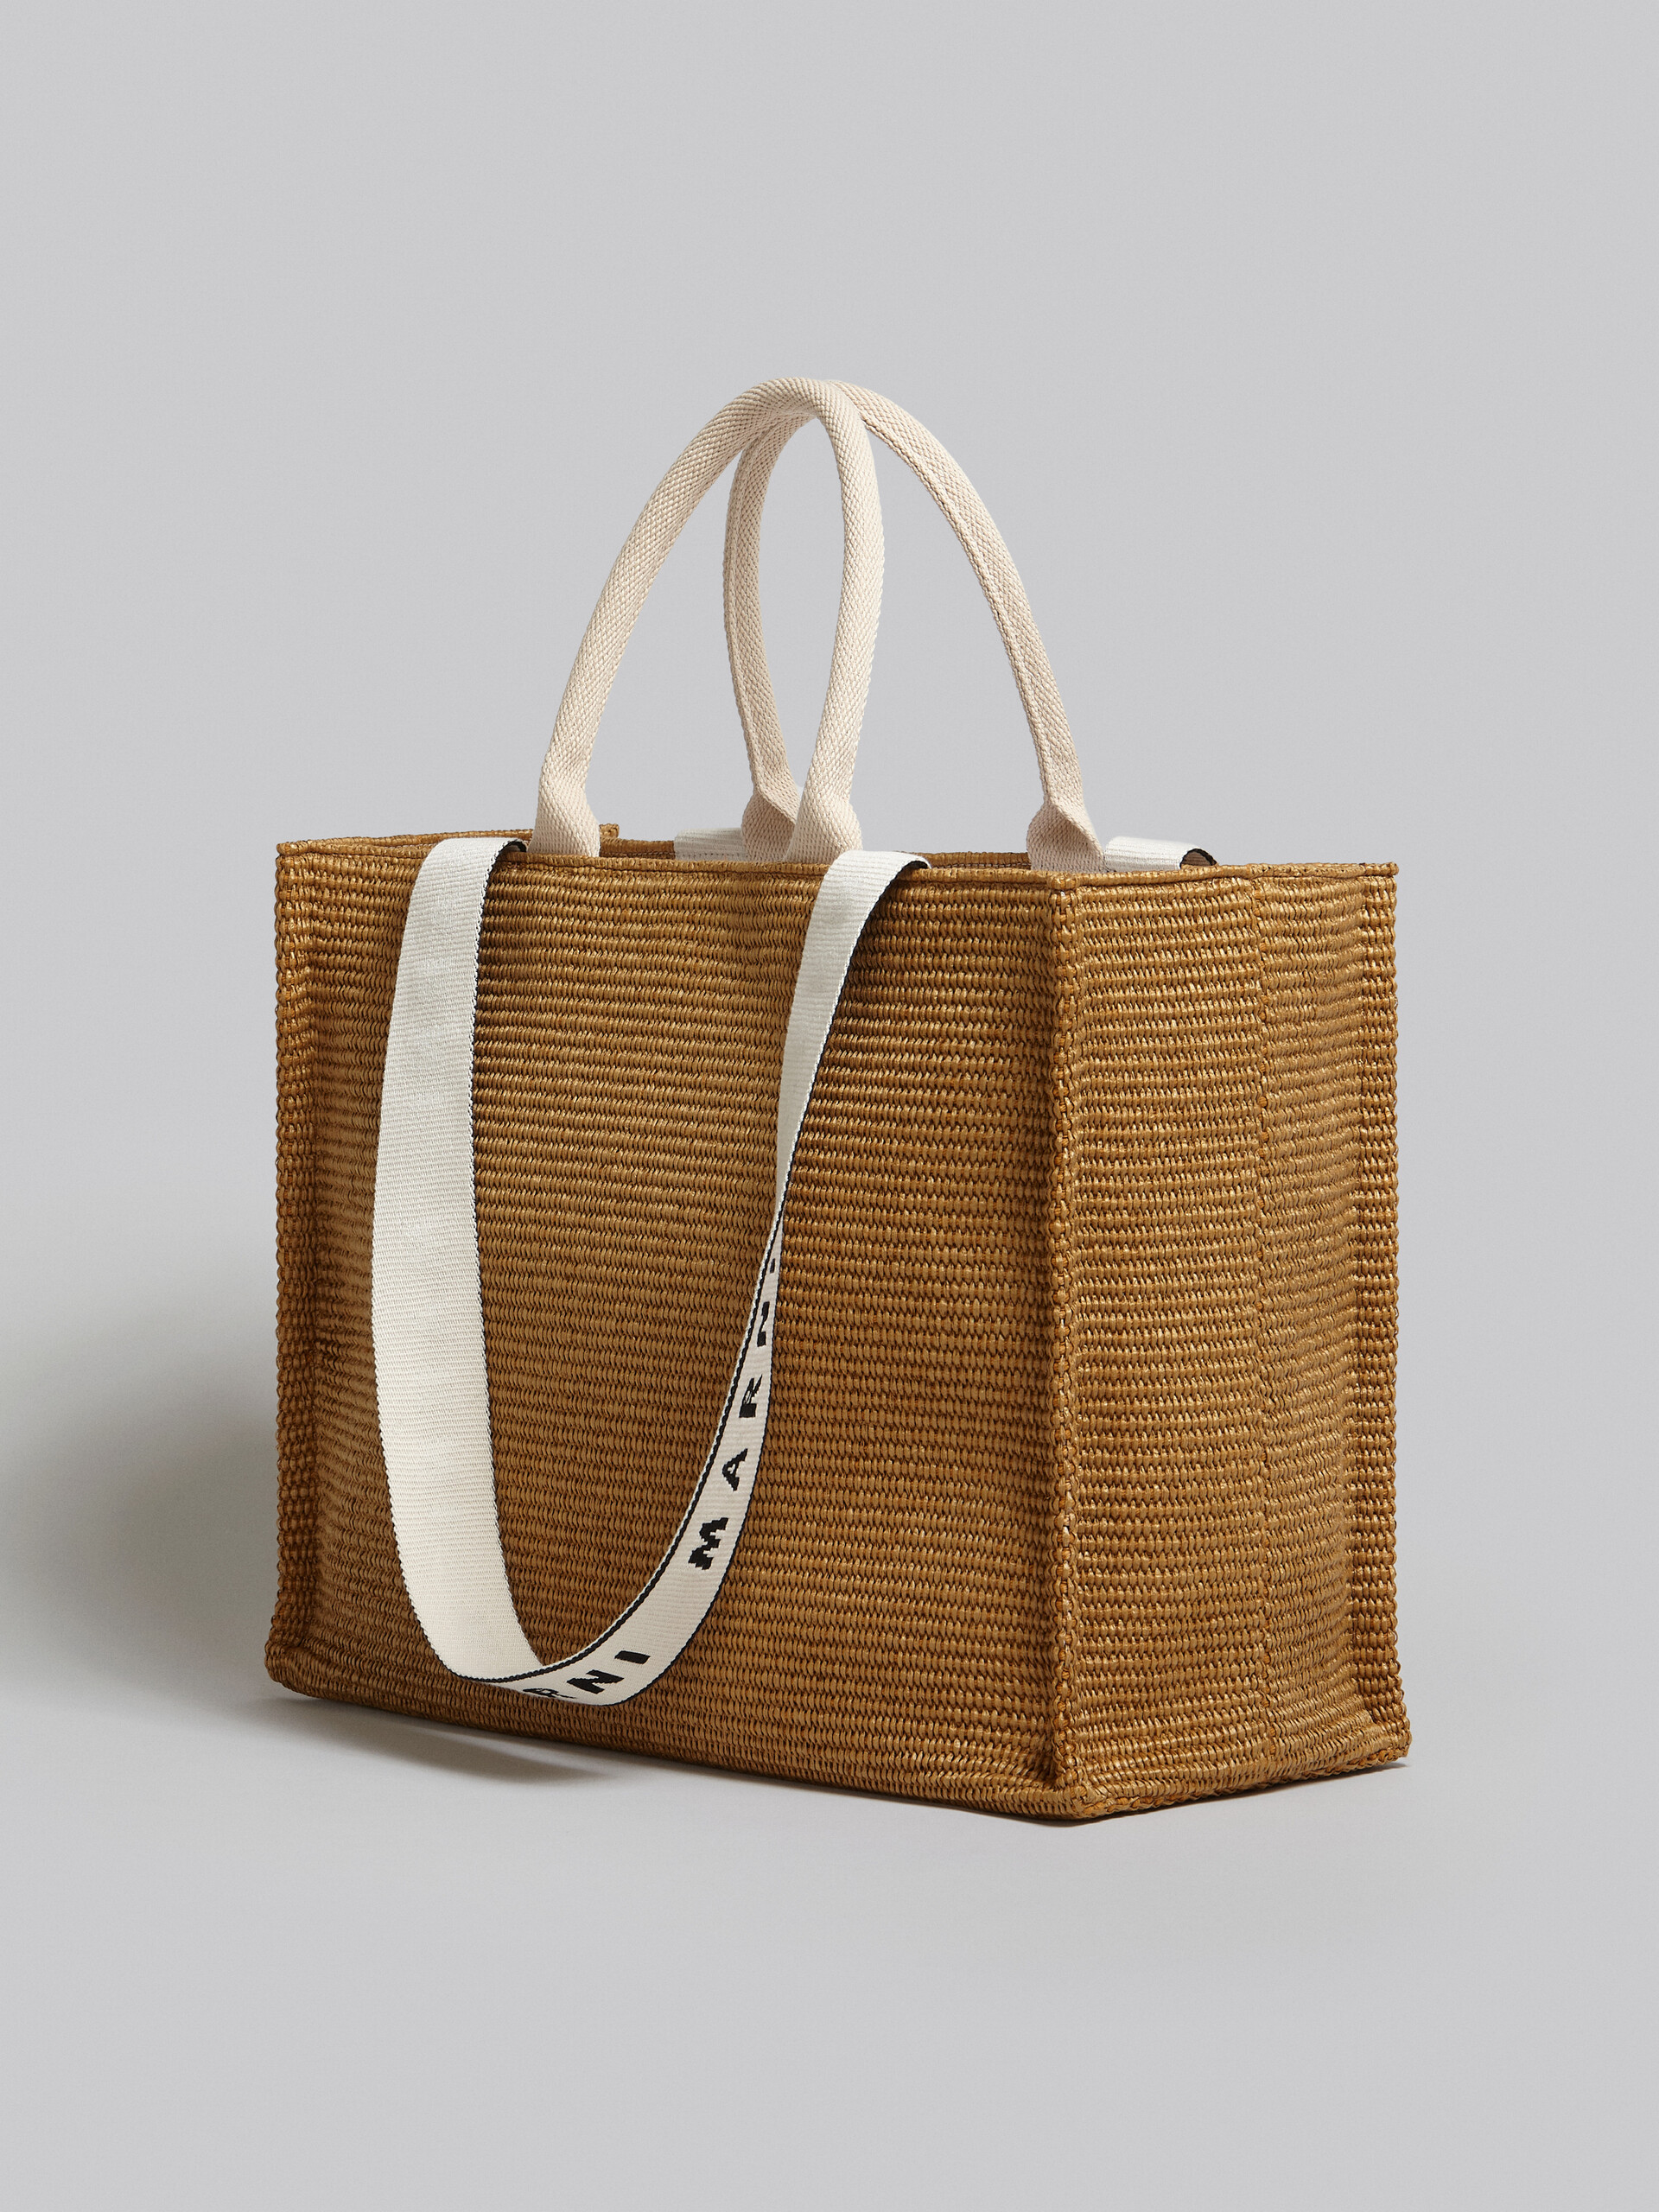 Bey tote Bag in brown raffia - Shopping Bags - Image 3